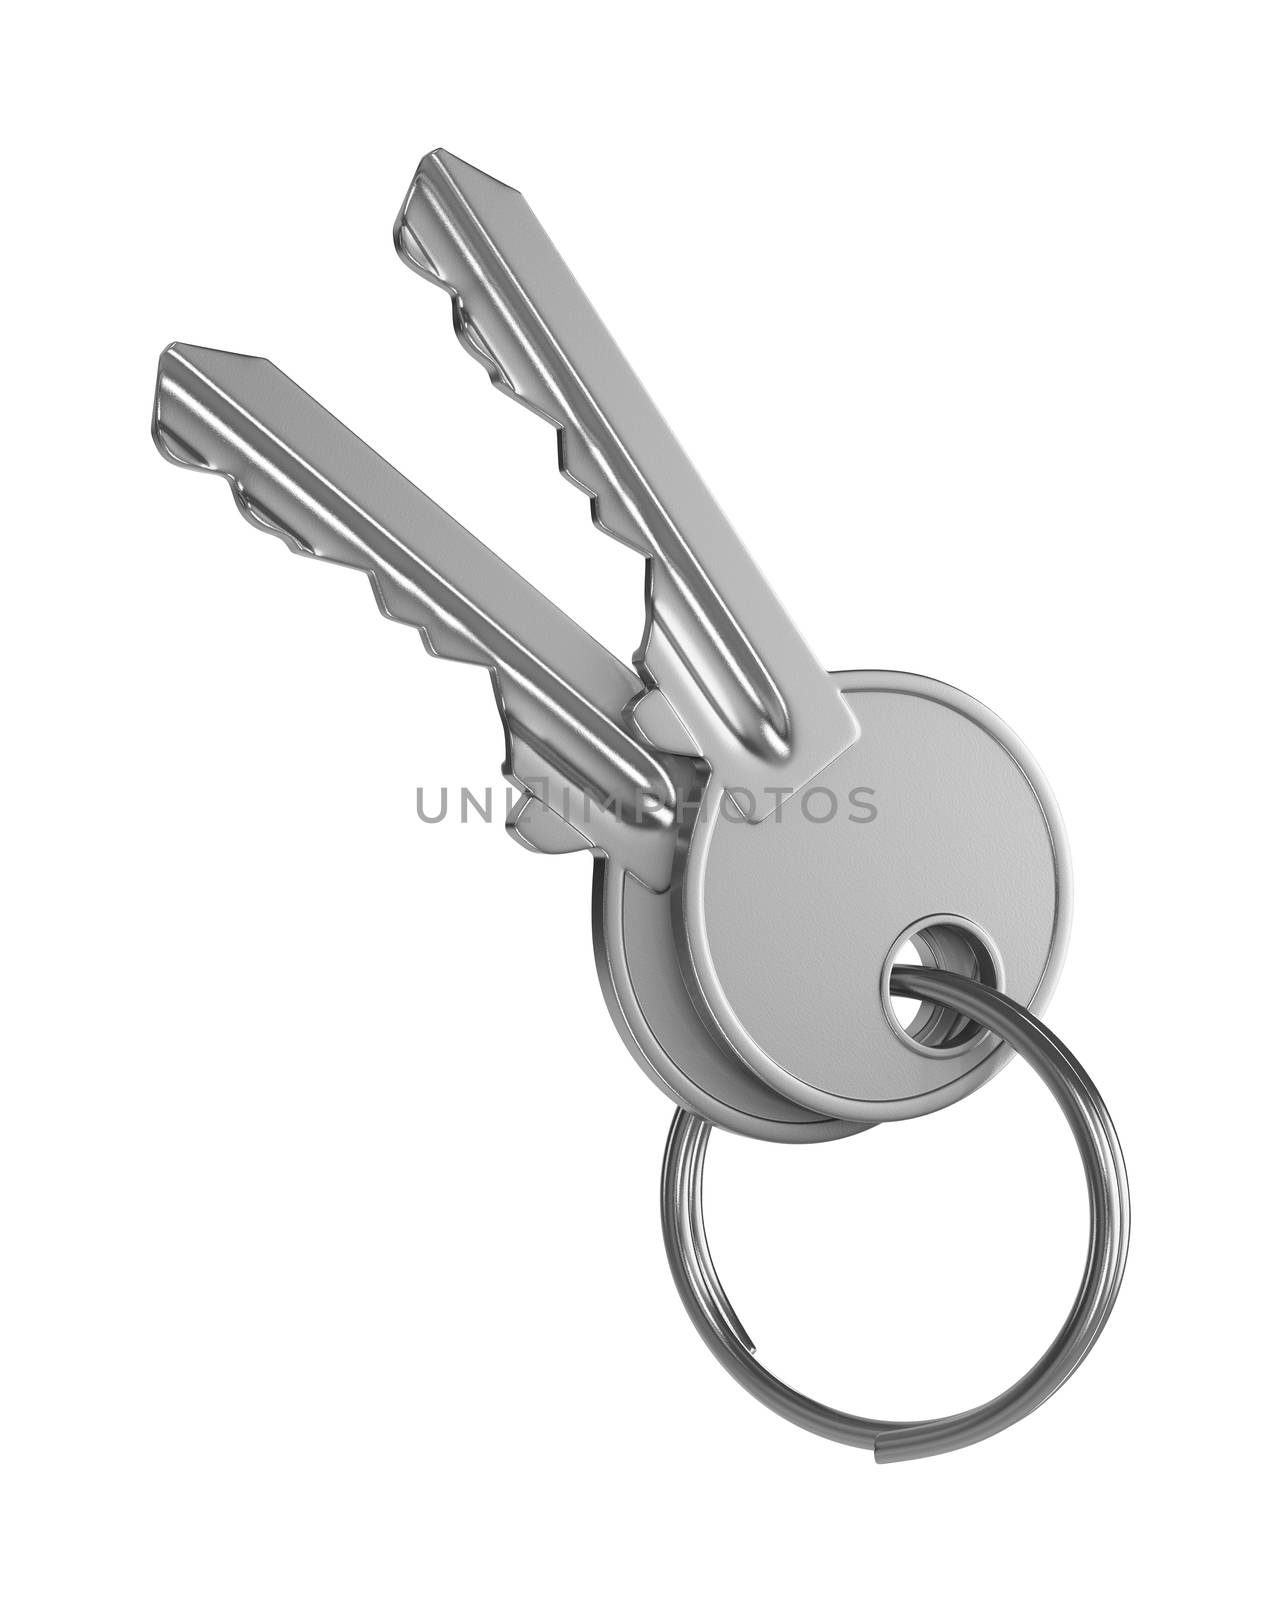 Two Metal Keys with Key Rings Isolated on White Background 3D Illustration